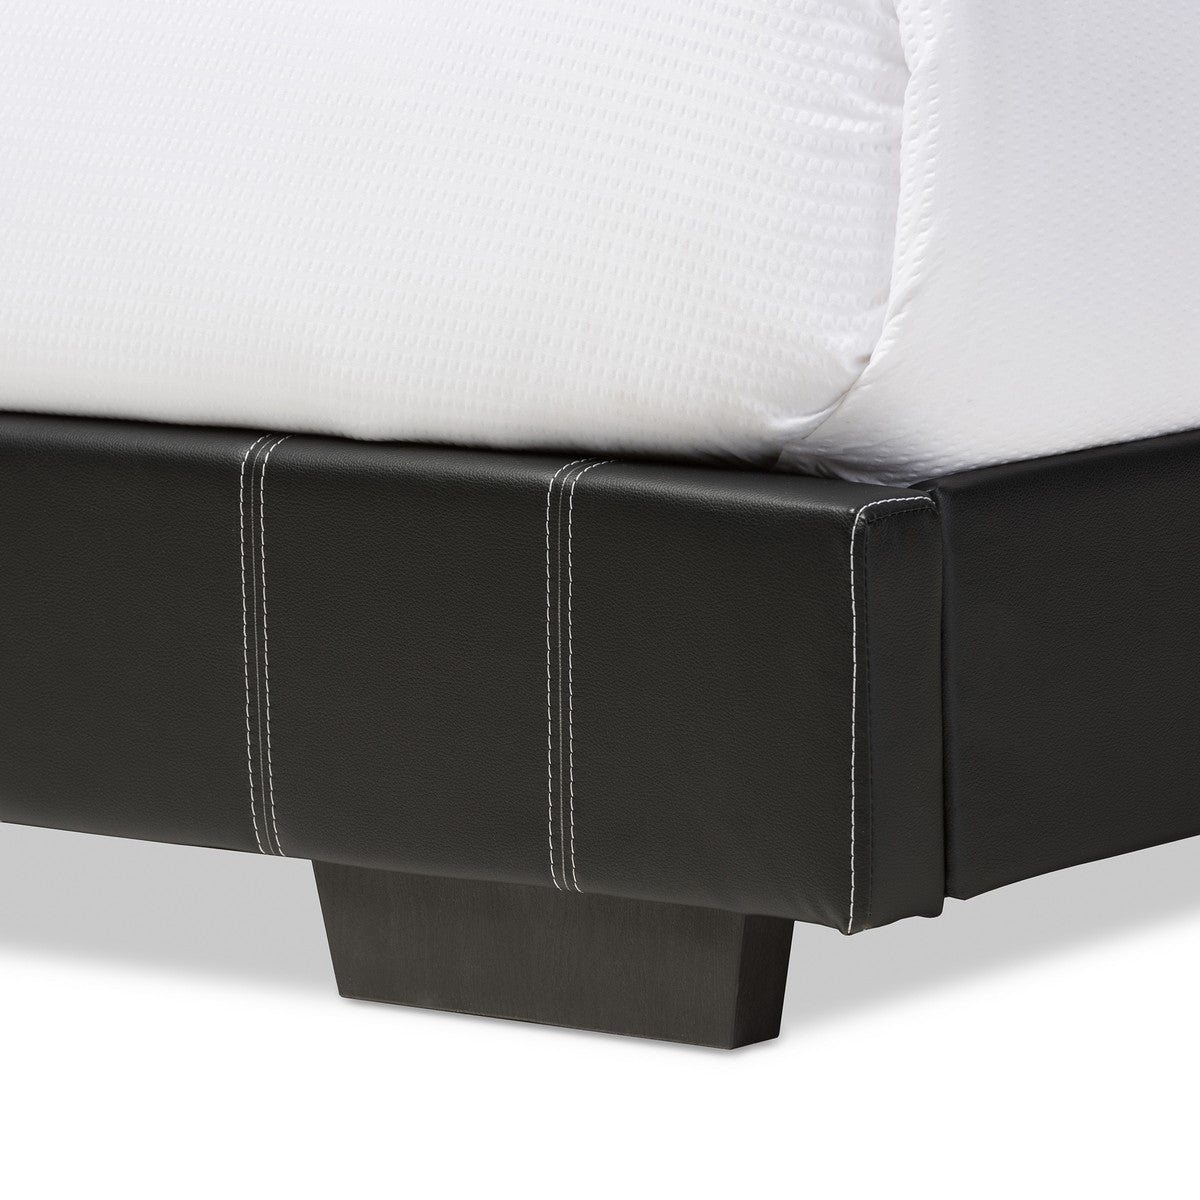 Baxton Studio Solo Modern and Contemporary Black Faux Leather Full Size Platform Bed